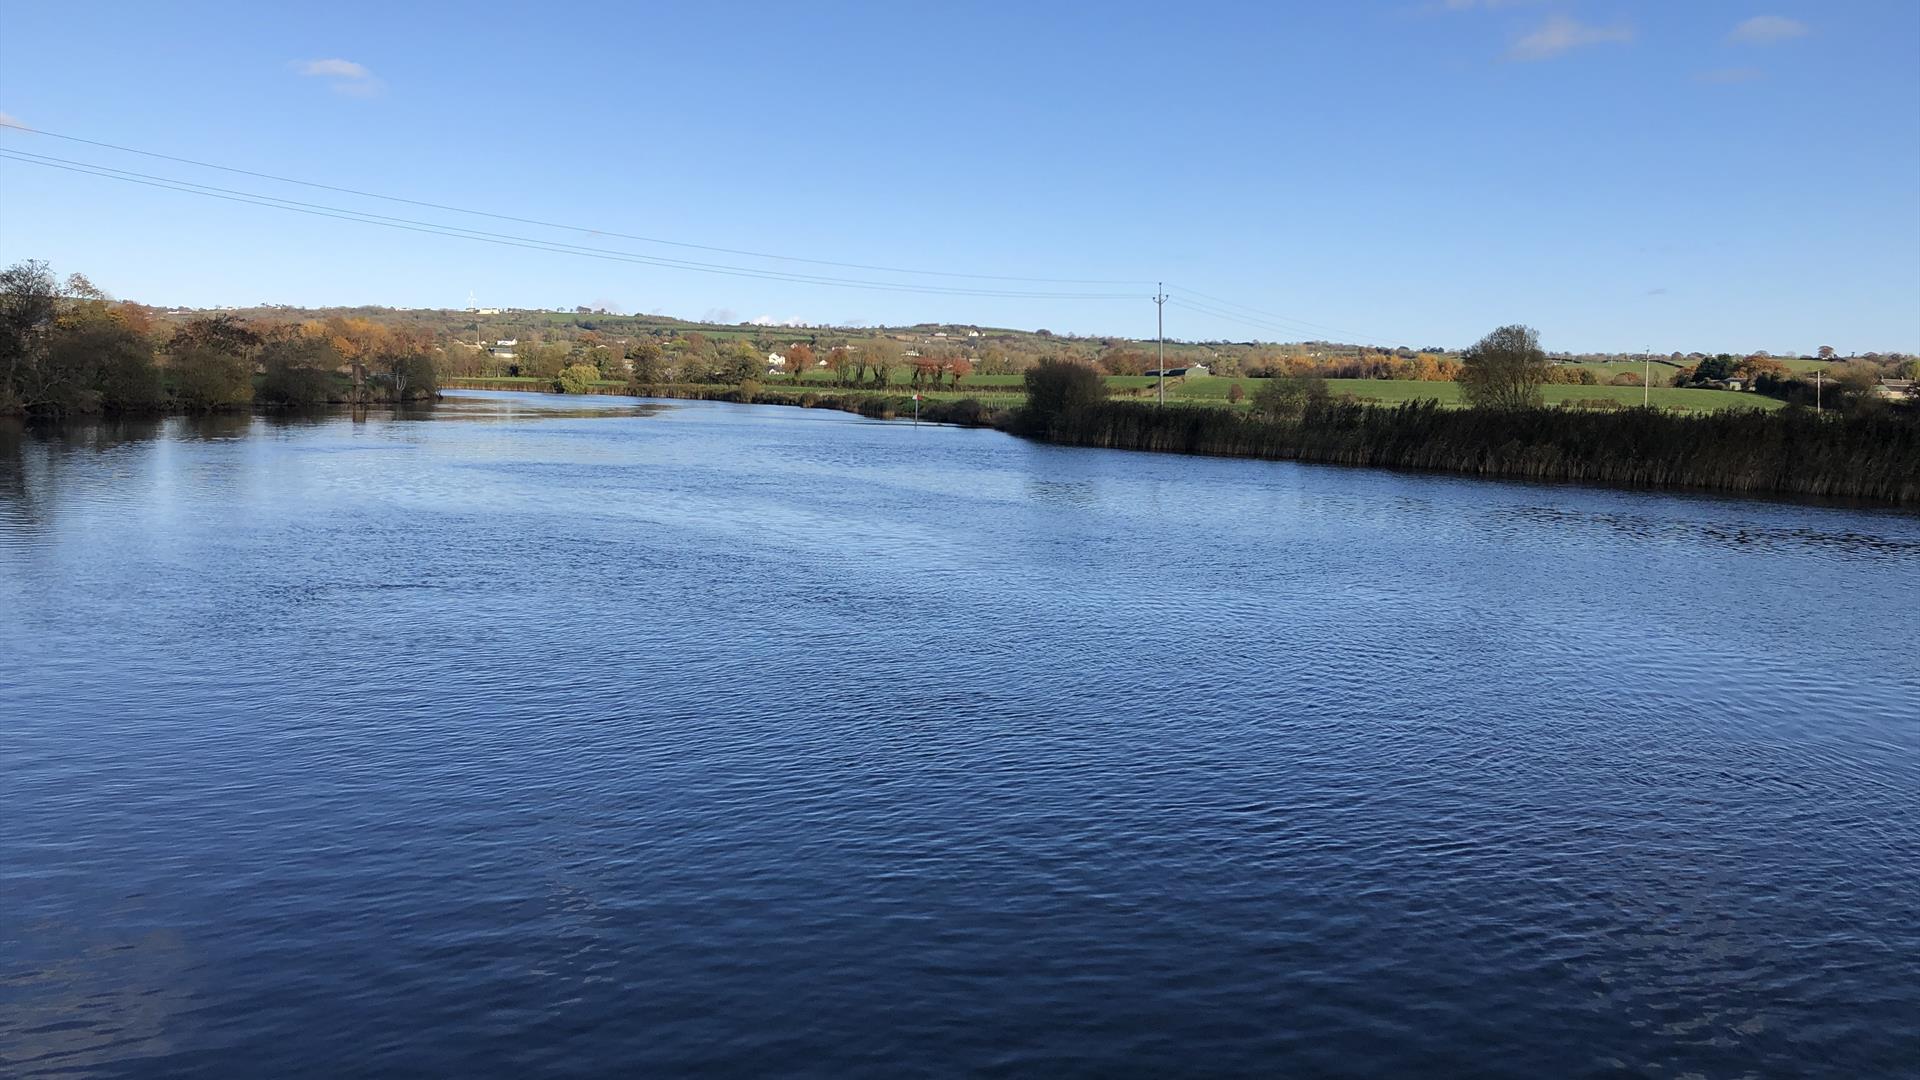 Image of the Lower Bann